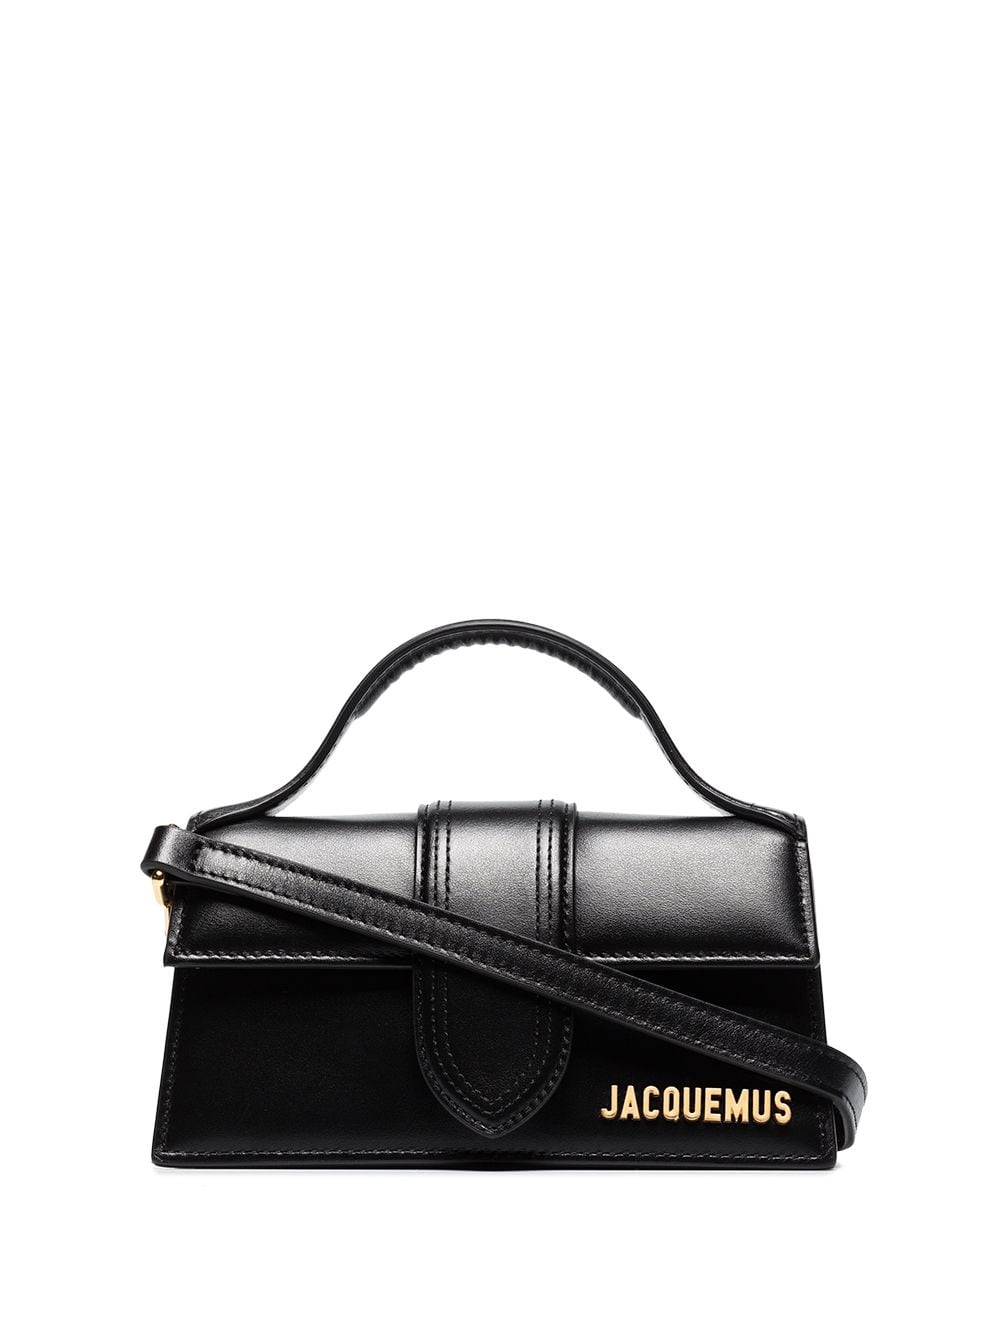 Image 1 of Jacquemus Le Bambino leather tote bag